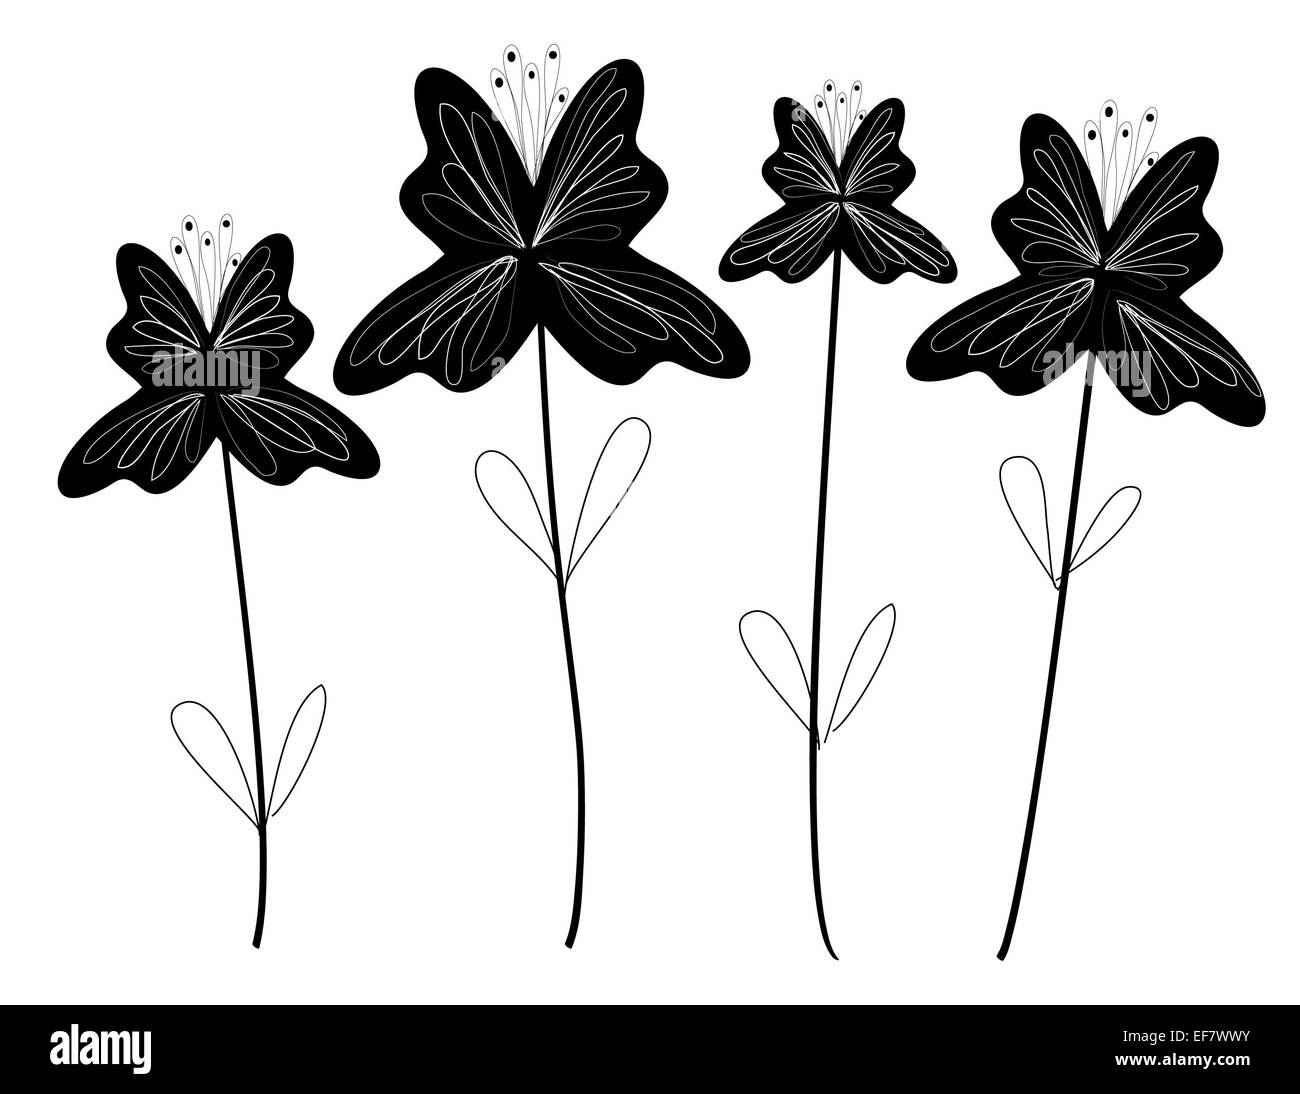 Black and white illustration four delicate flowers for decorative purposes and romantic themes Stock Photo